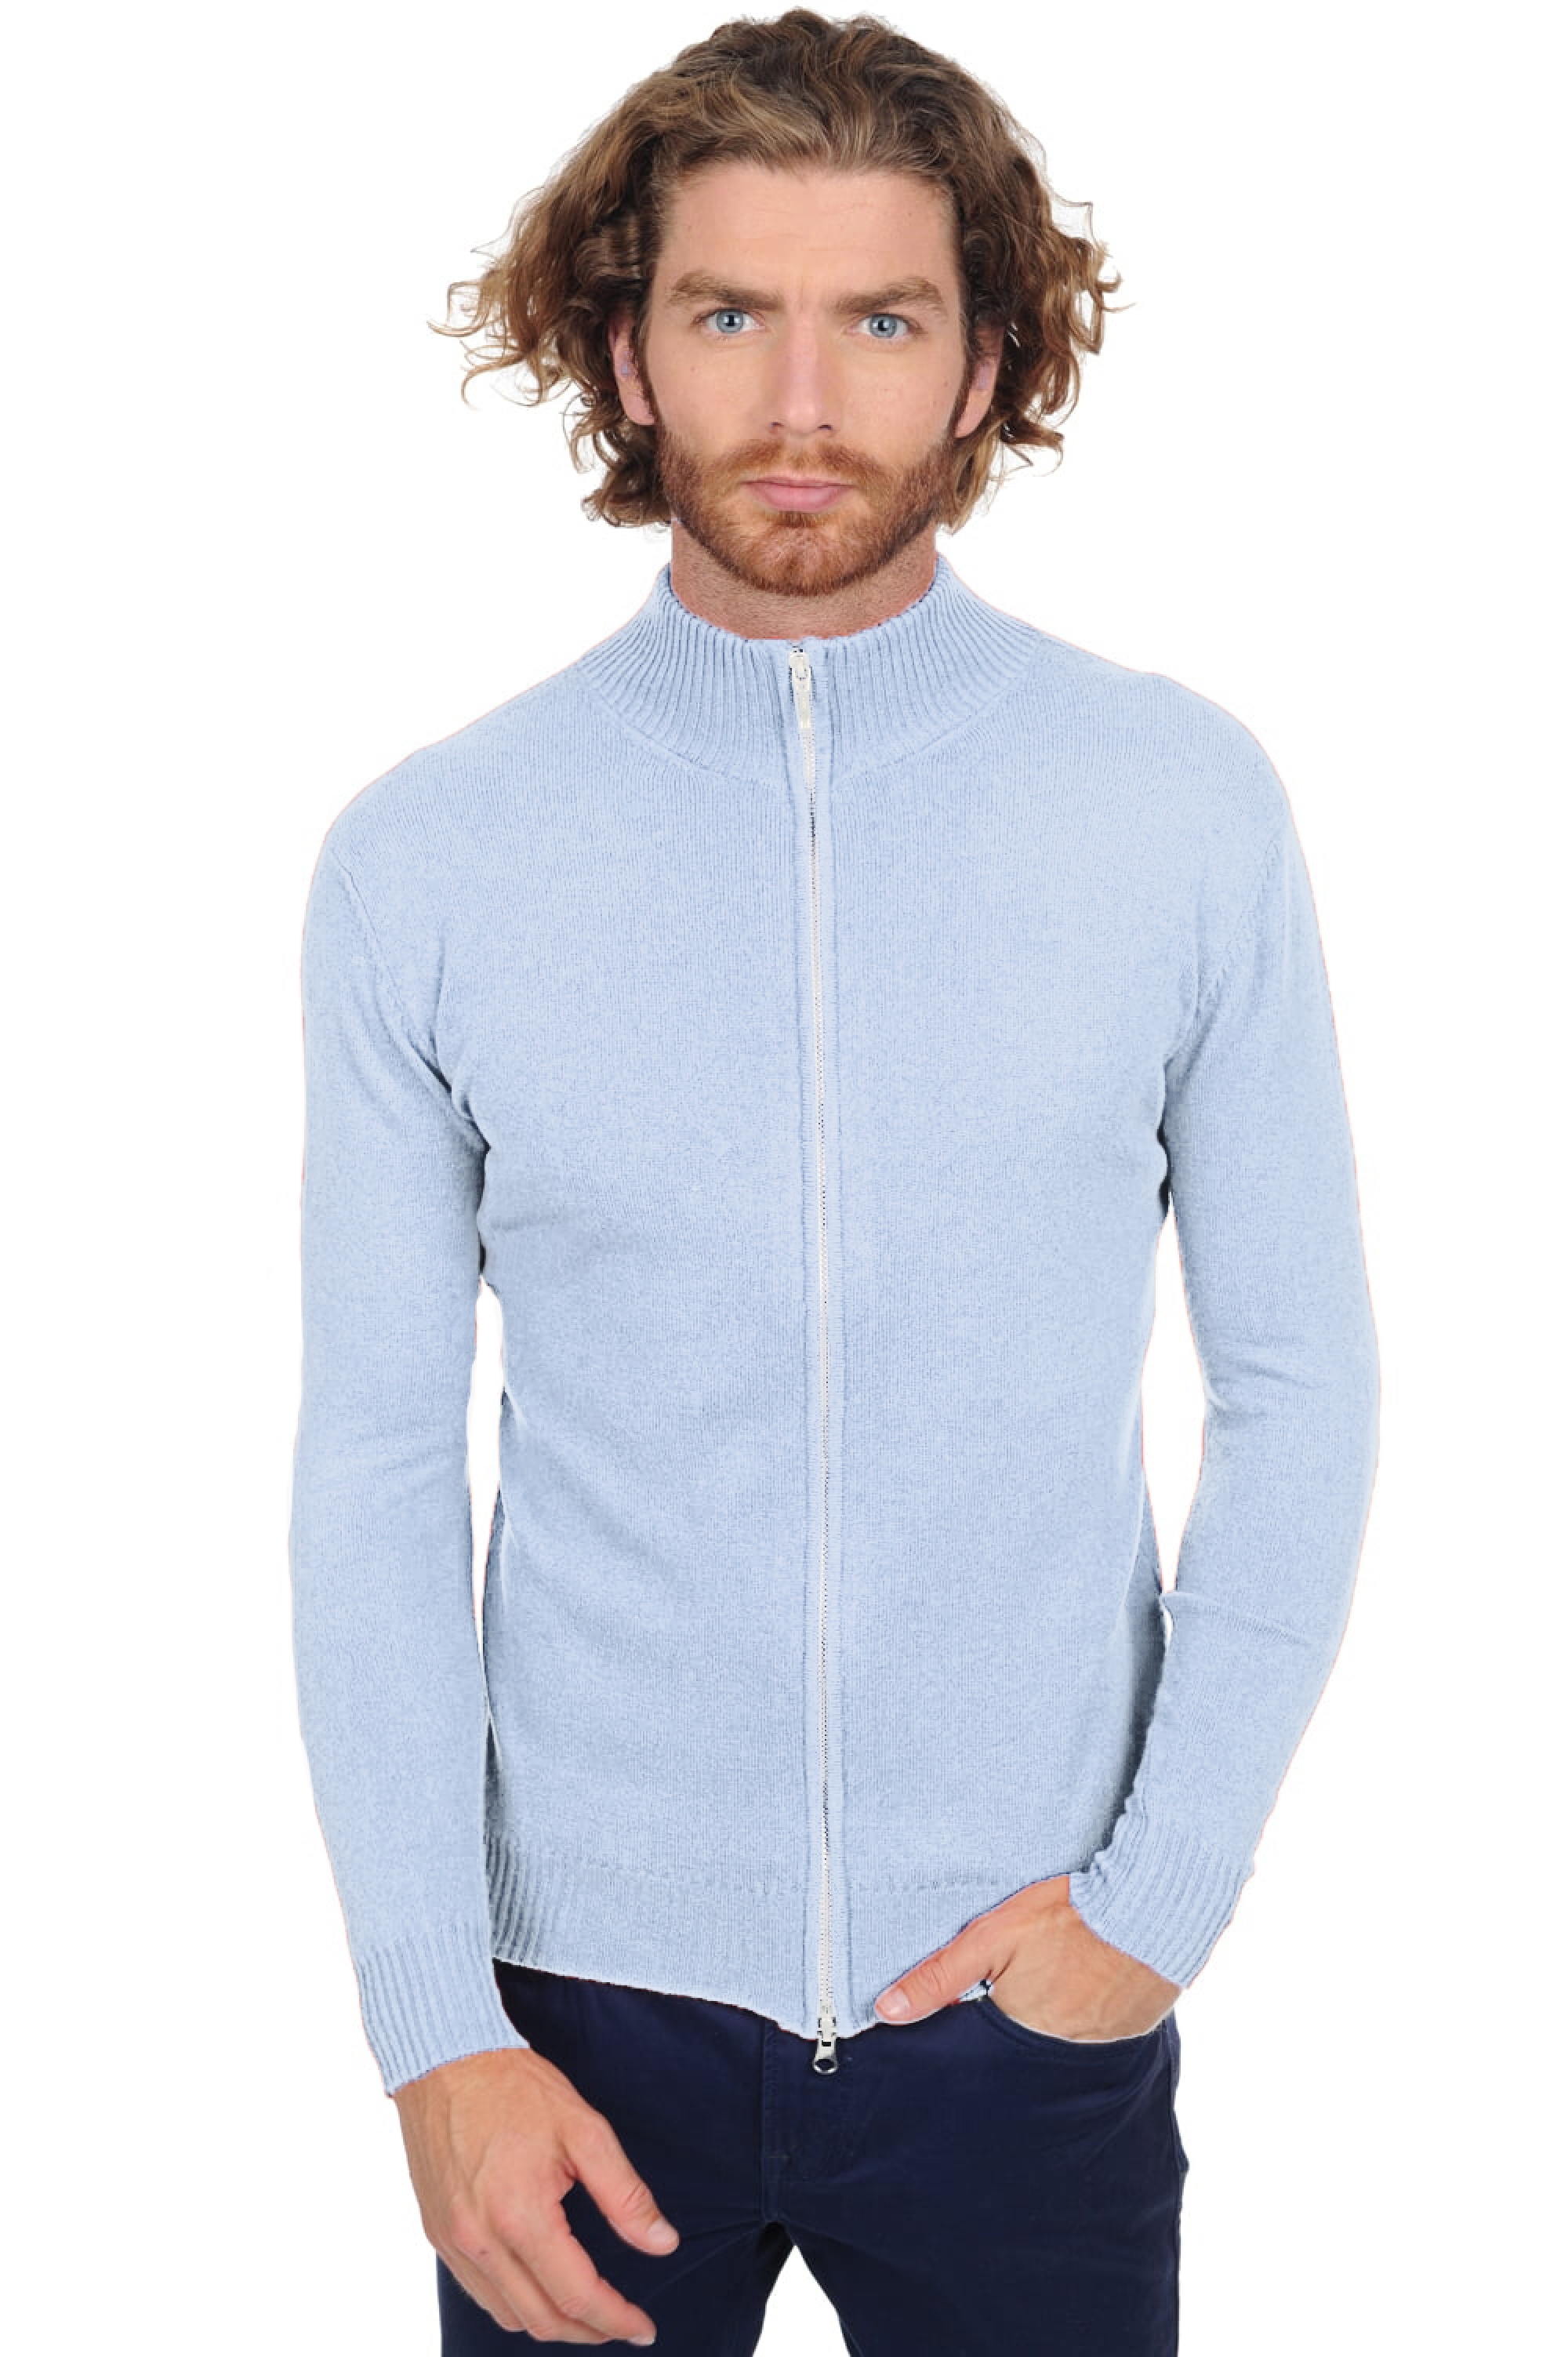 Cashmere men basic sweaters at low prices thobias first sky blue l